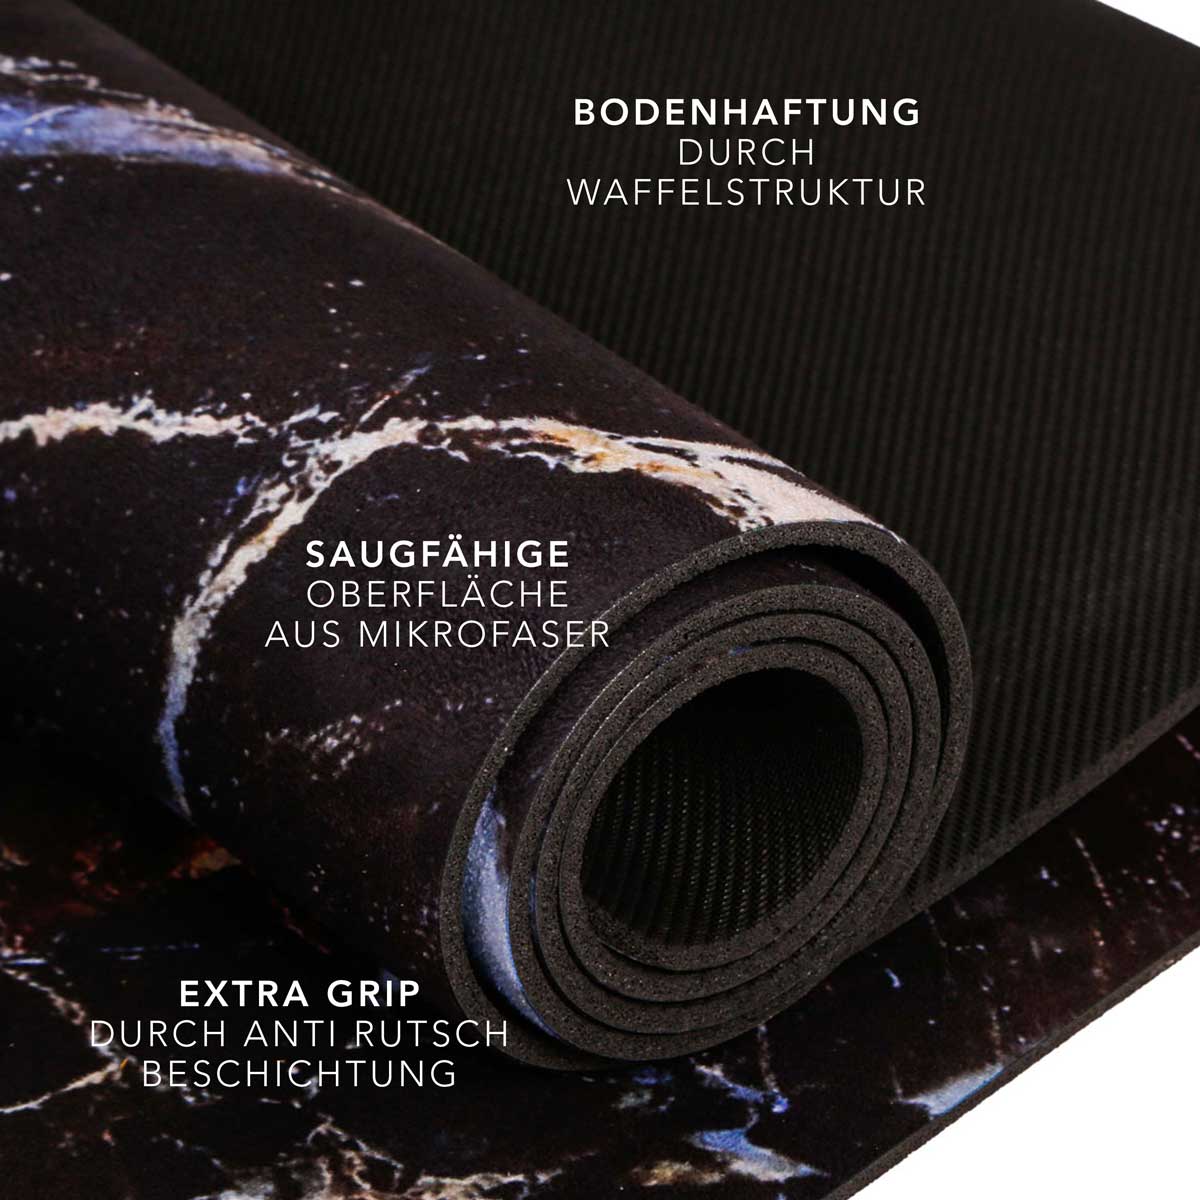 ALL-IN-ONE YOGAMATTE BLACK MARBLE